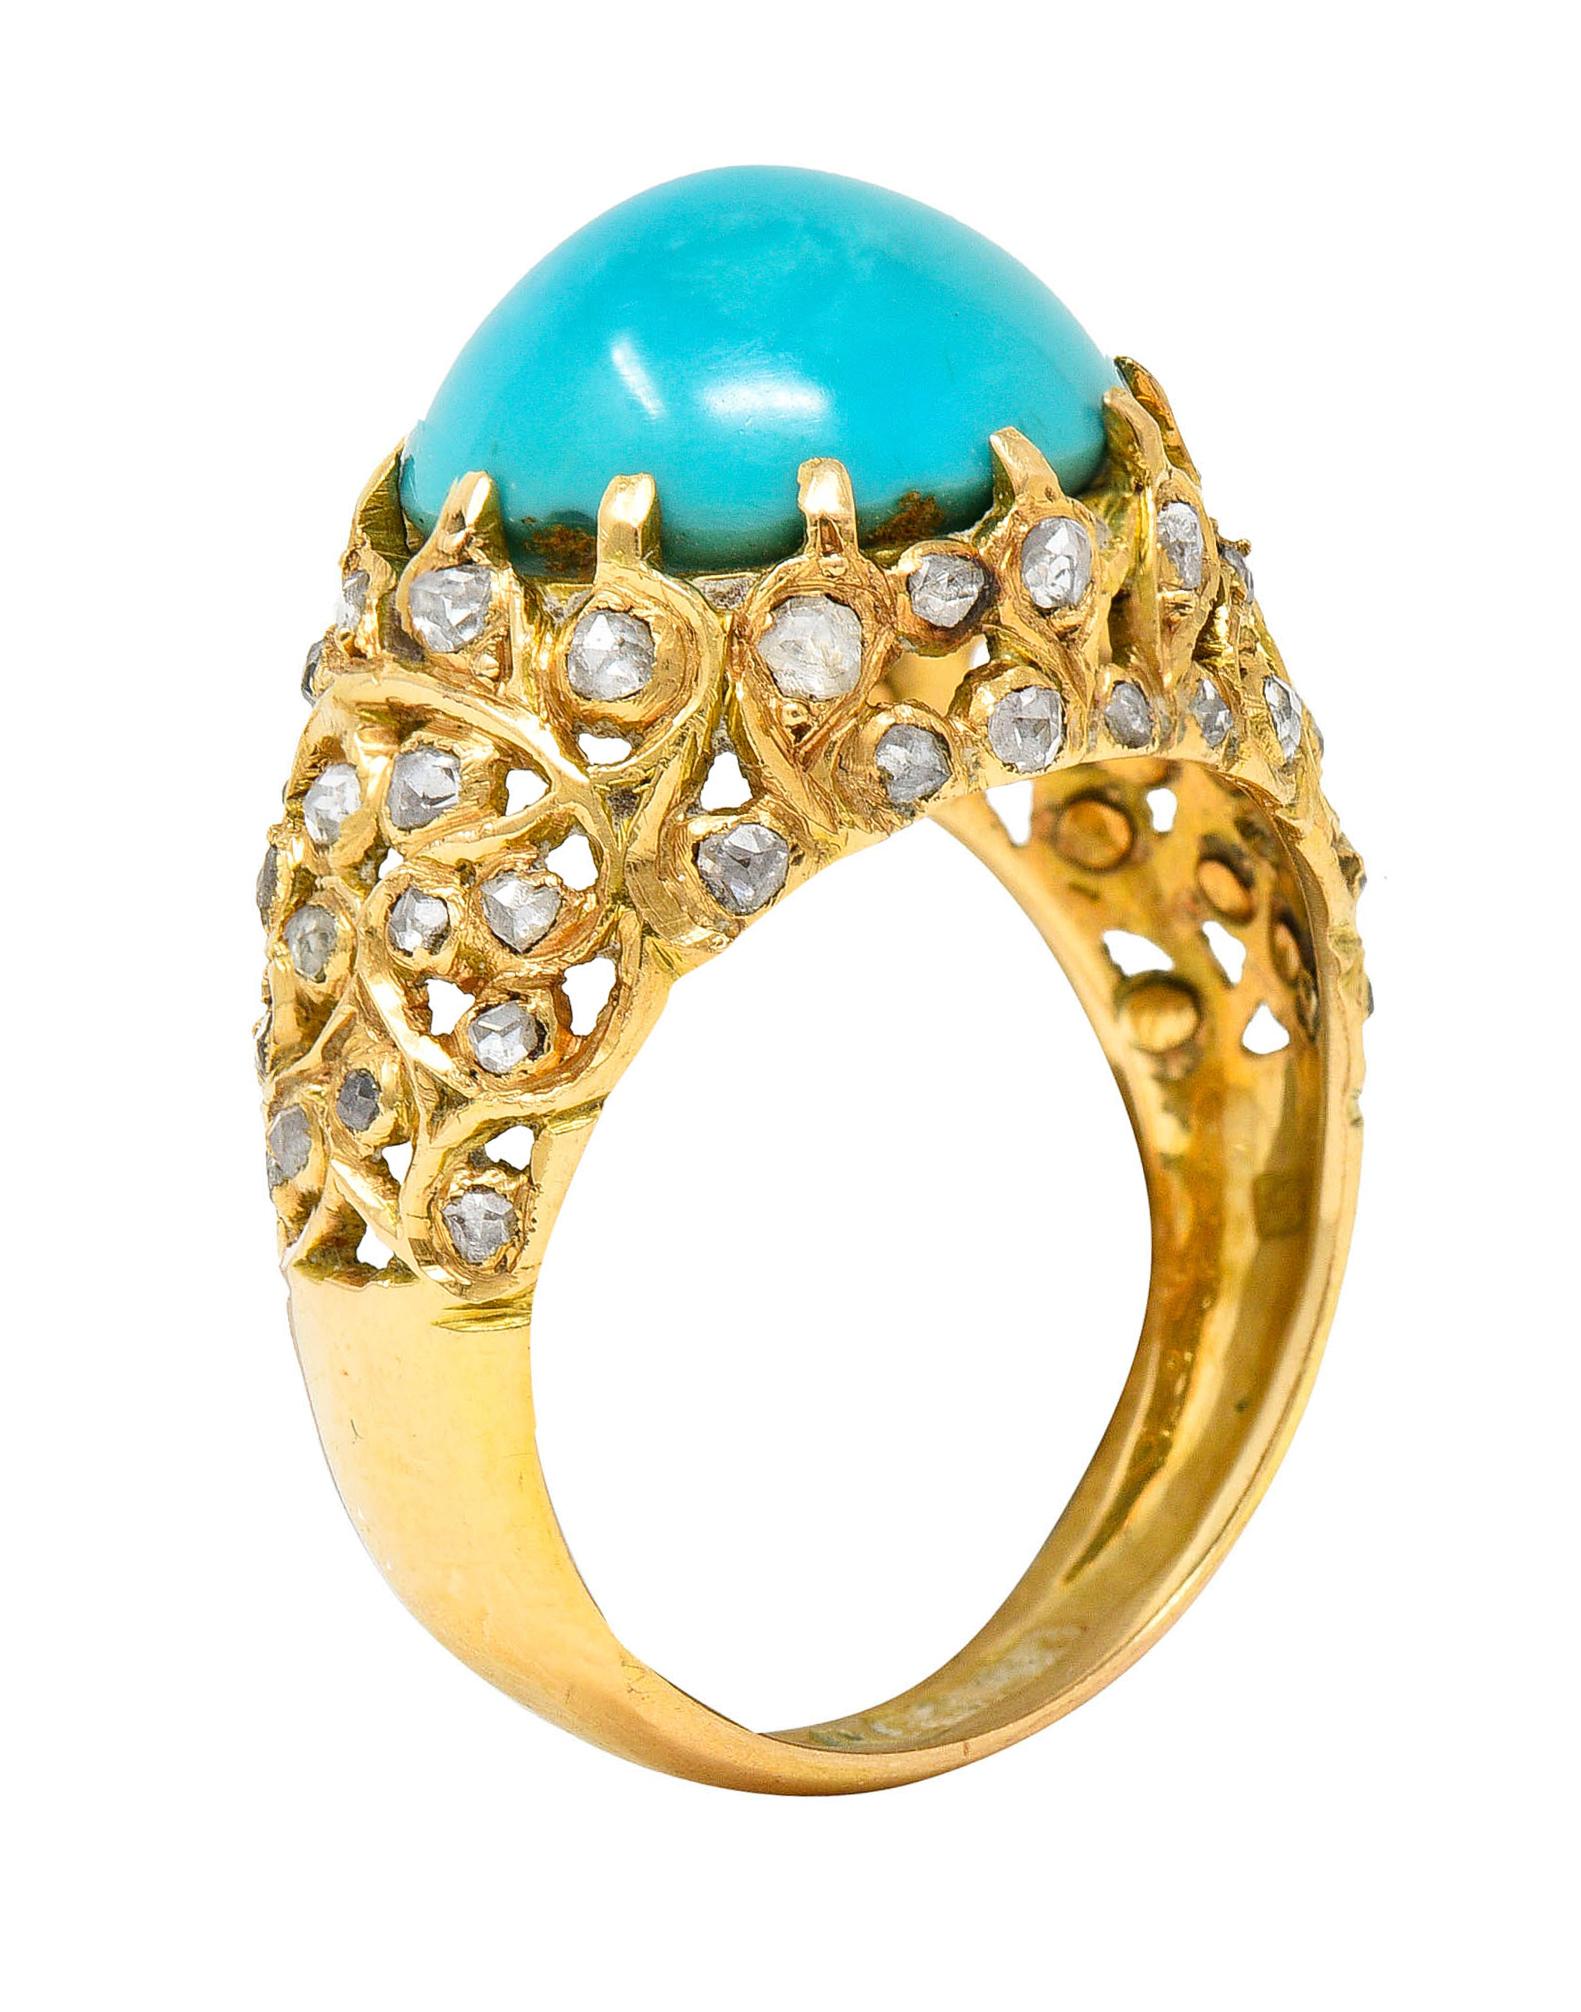 Bombè band ring features a 12.5 mm round turquoise cabochon

Opaque with slightly greenish and strongly blue color with moderately swirled color distribution

Talon set then surrounded by pierced and scrolling foliate motifs

Accented throughout by